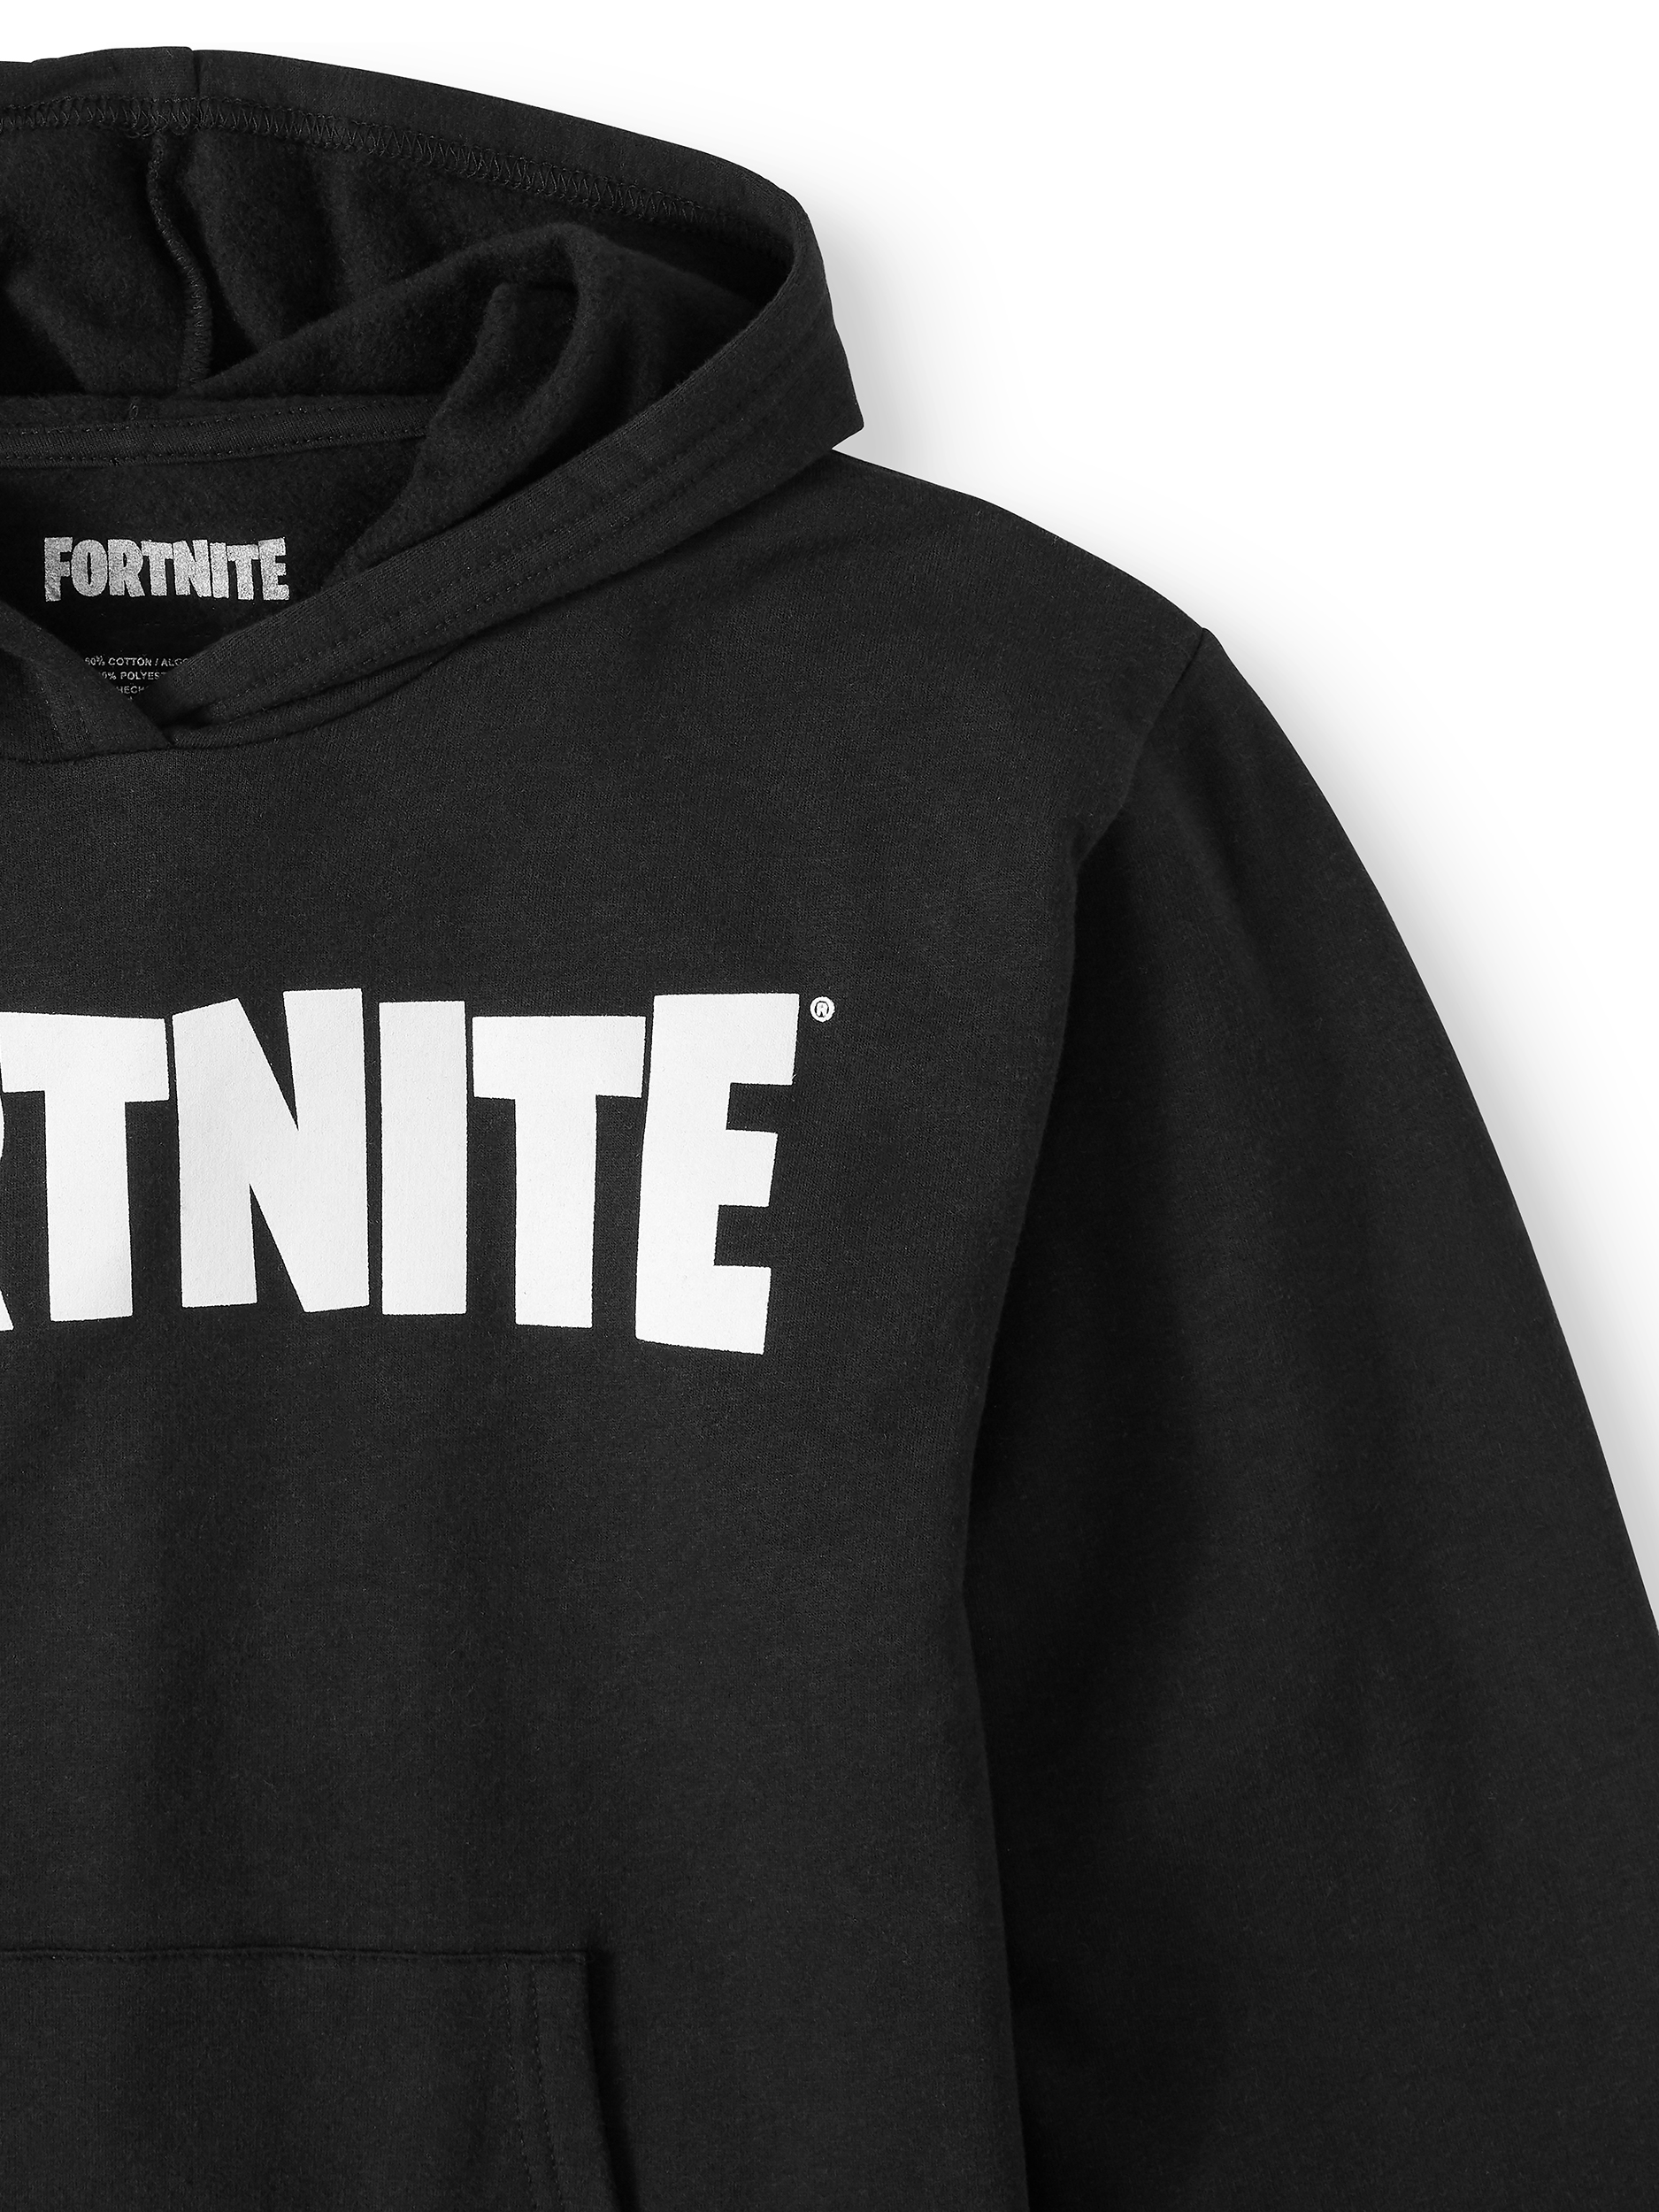 Epic Games by Fortnite Long Sleeve Graphic Pullover Hooded Relaxed Fit Sweatshirt (Little Boys or Big Boys) 1 Pack - image 3 of 3